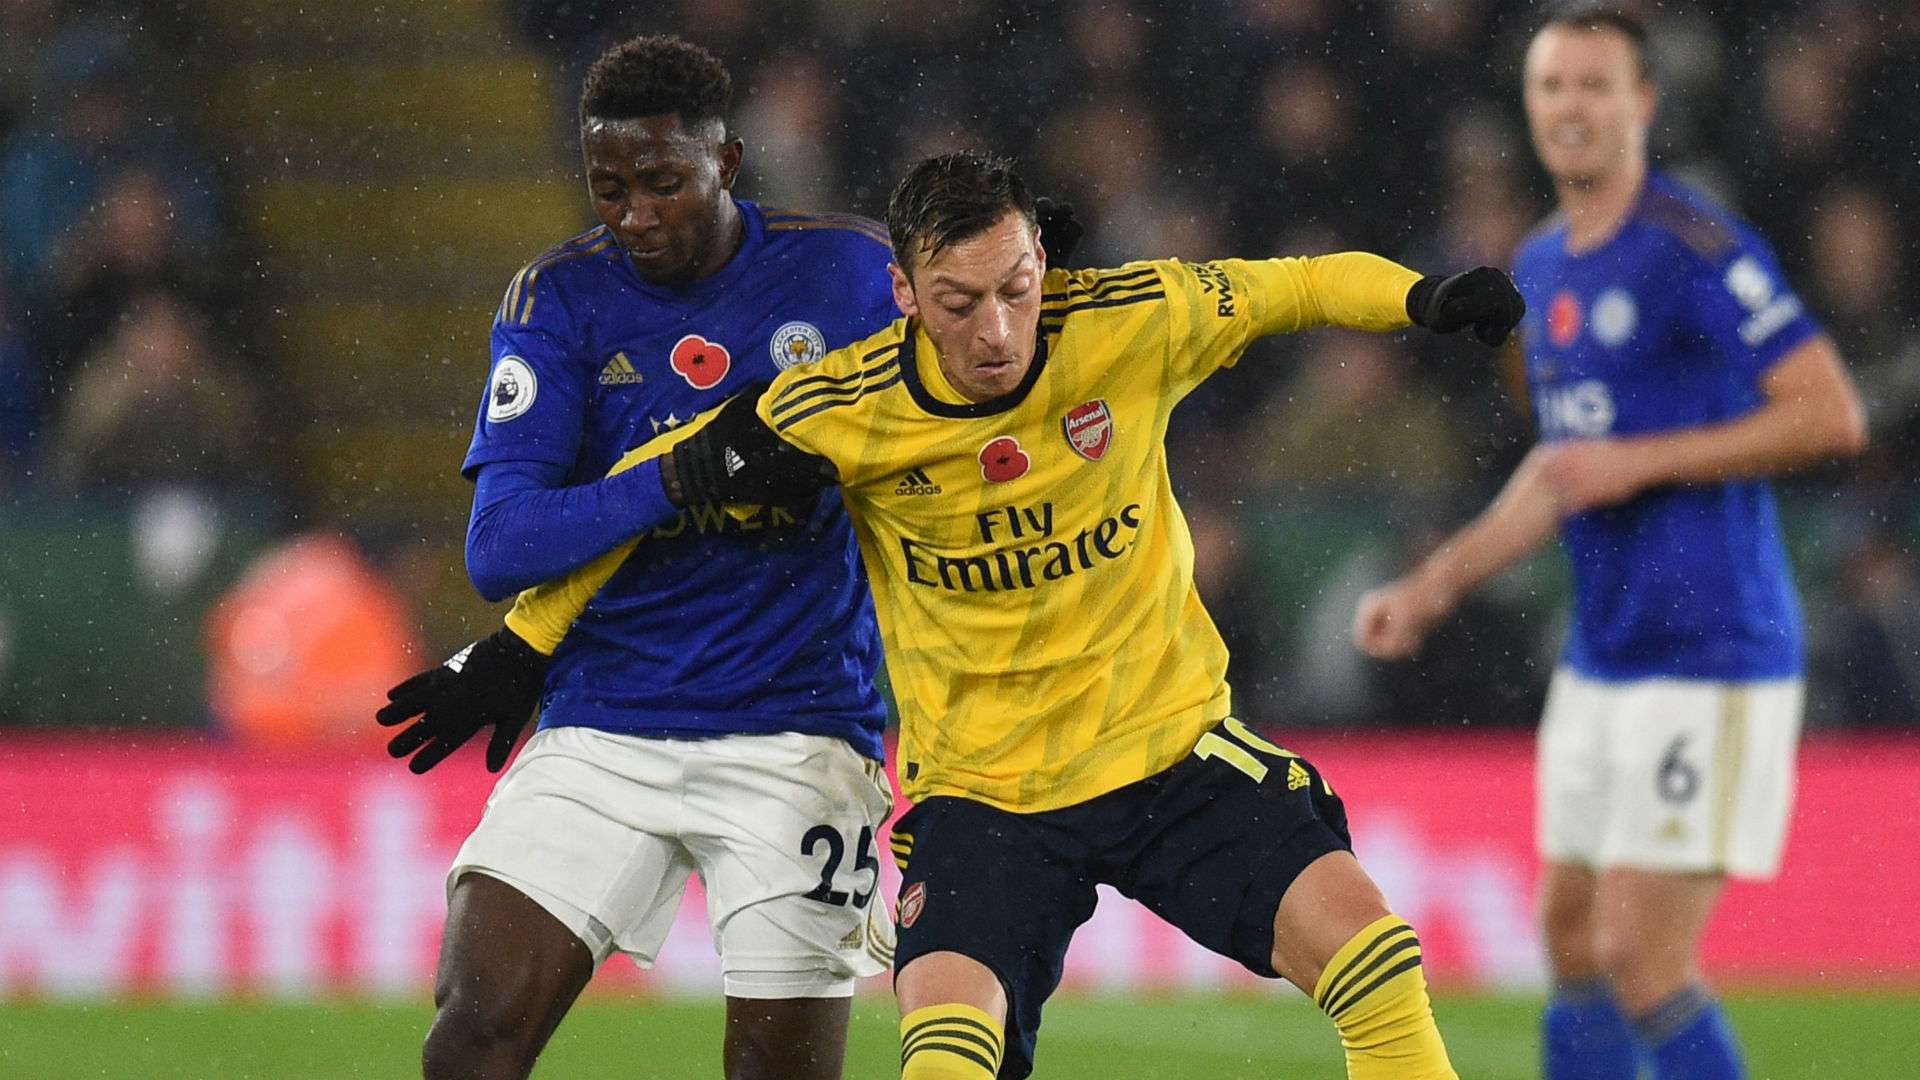 Wilfred Ndidi and Mesut Ozil - Leicester City vs Arsenal 2019-20